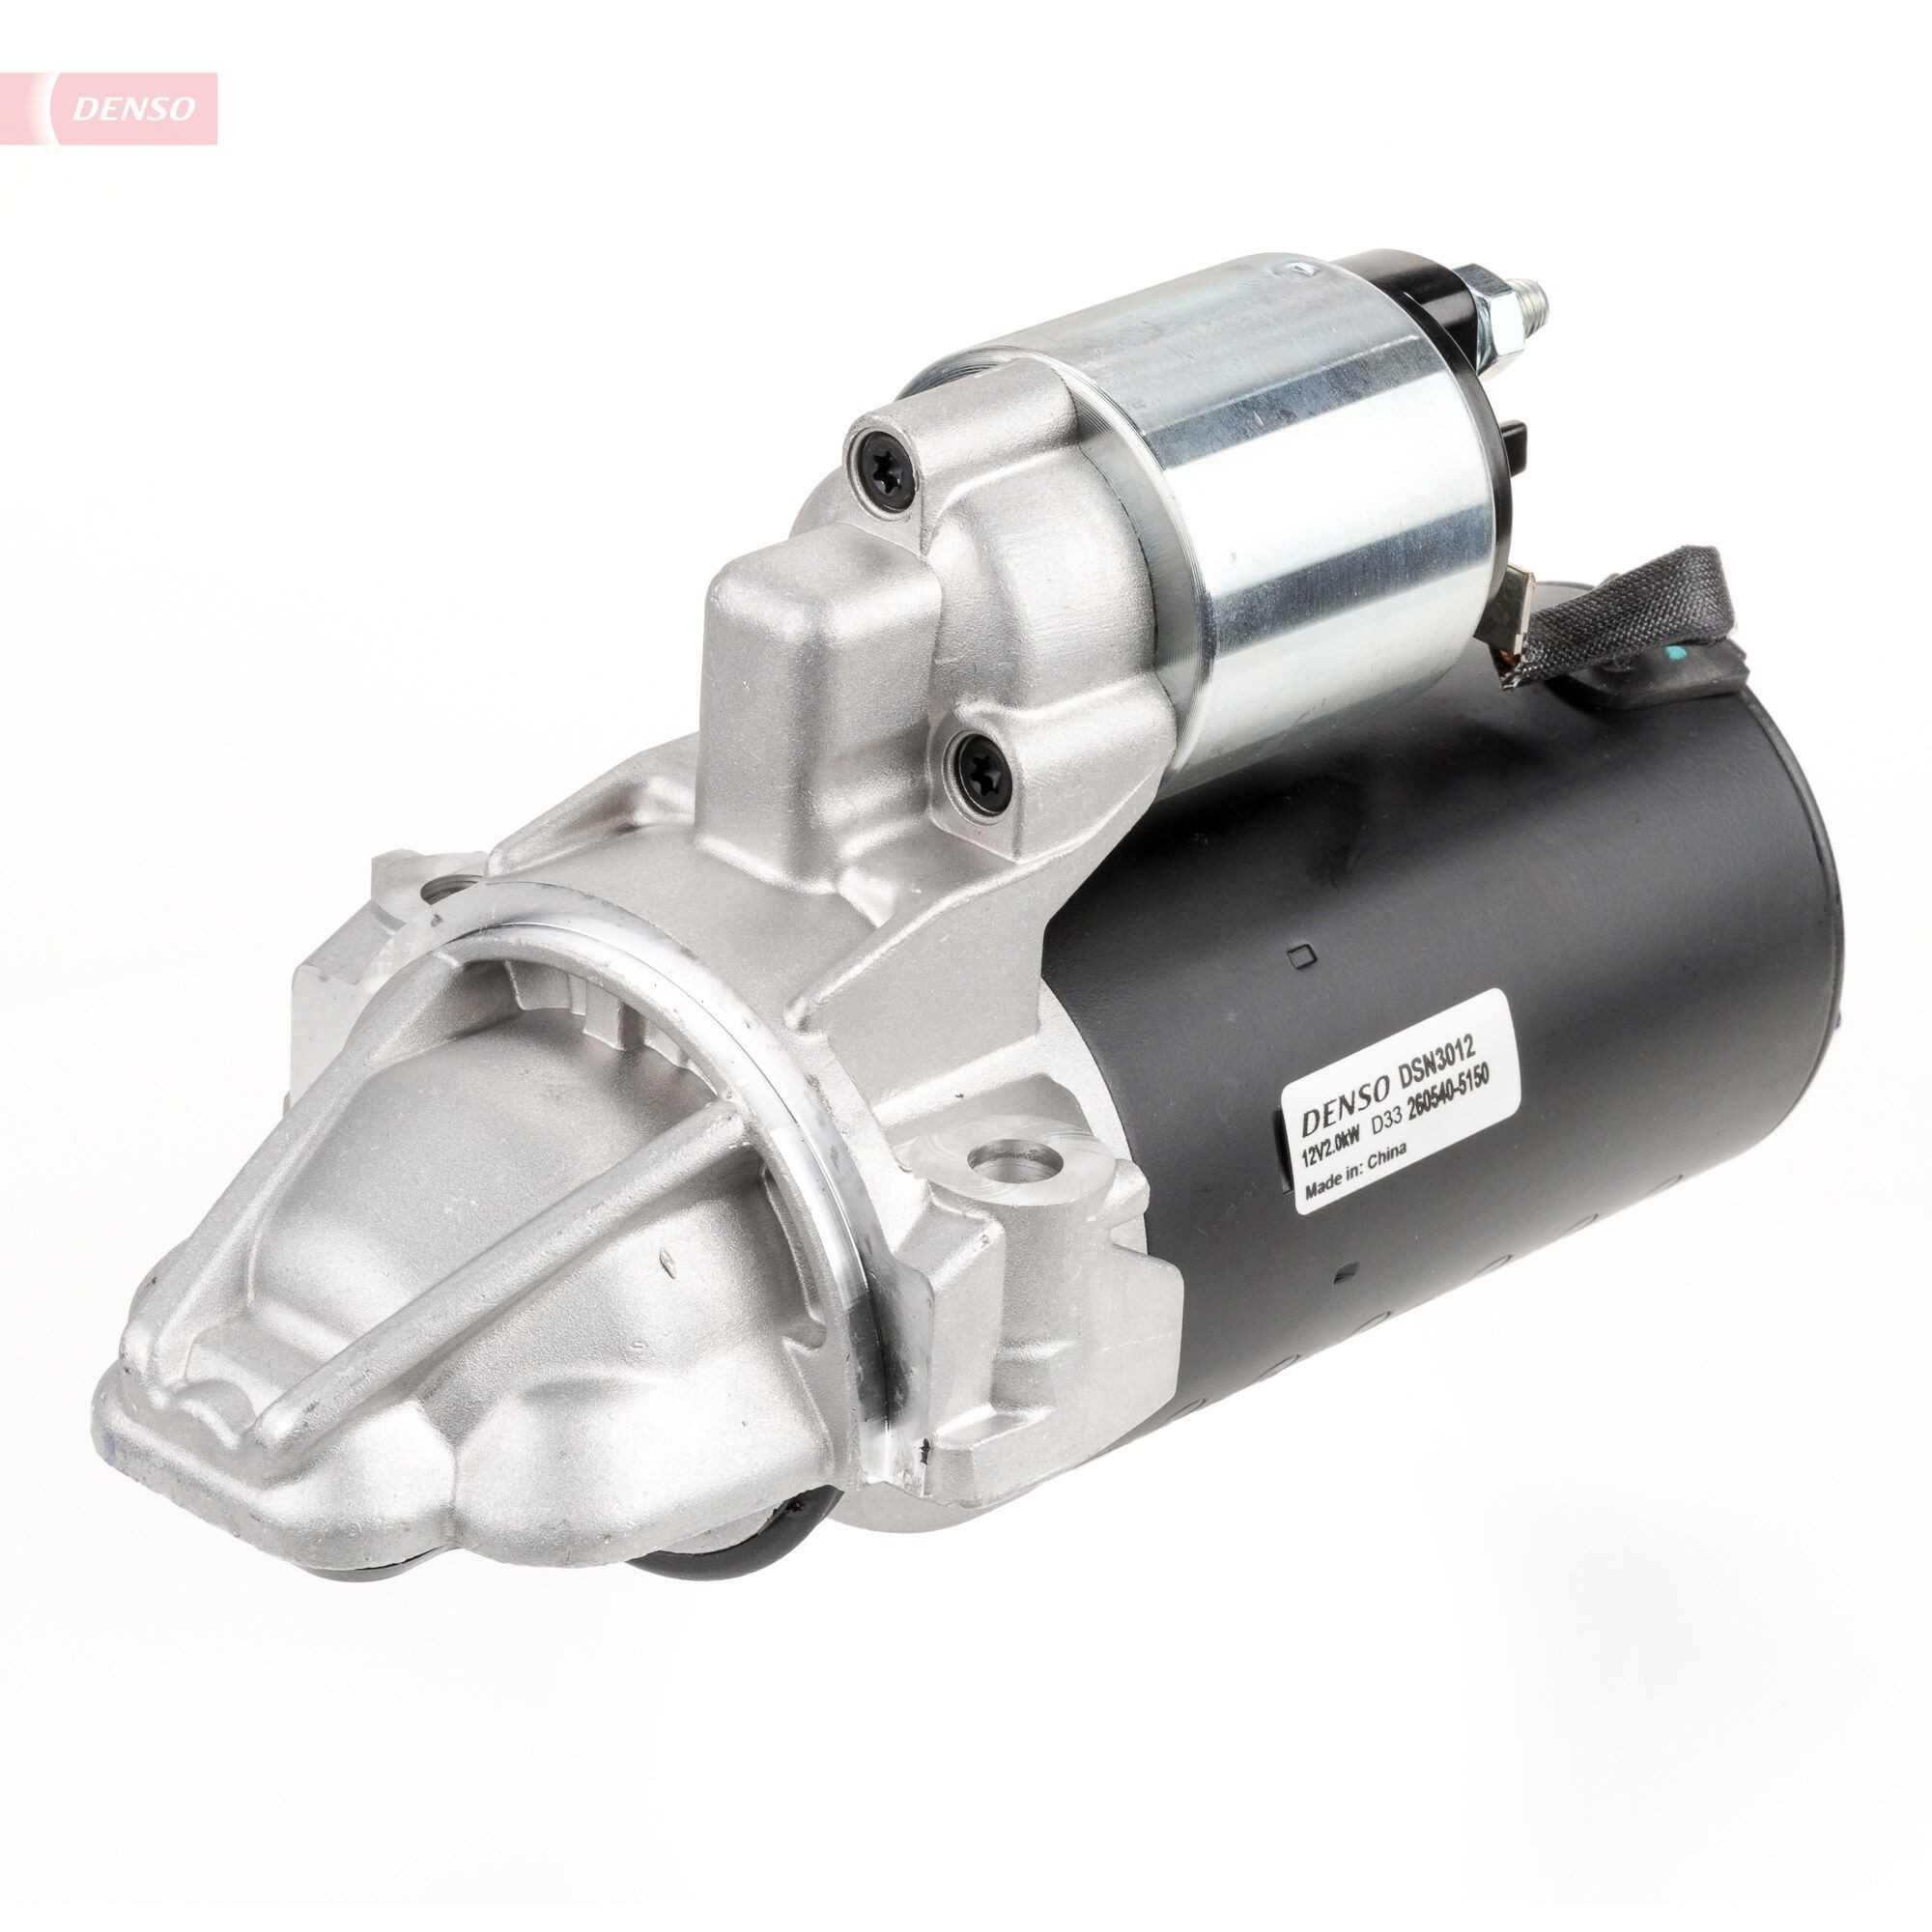 DENSO DSN3012 Starter motor PEUGEOT experience and price